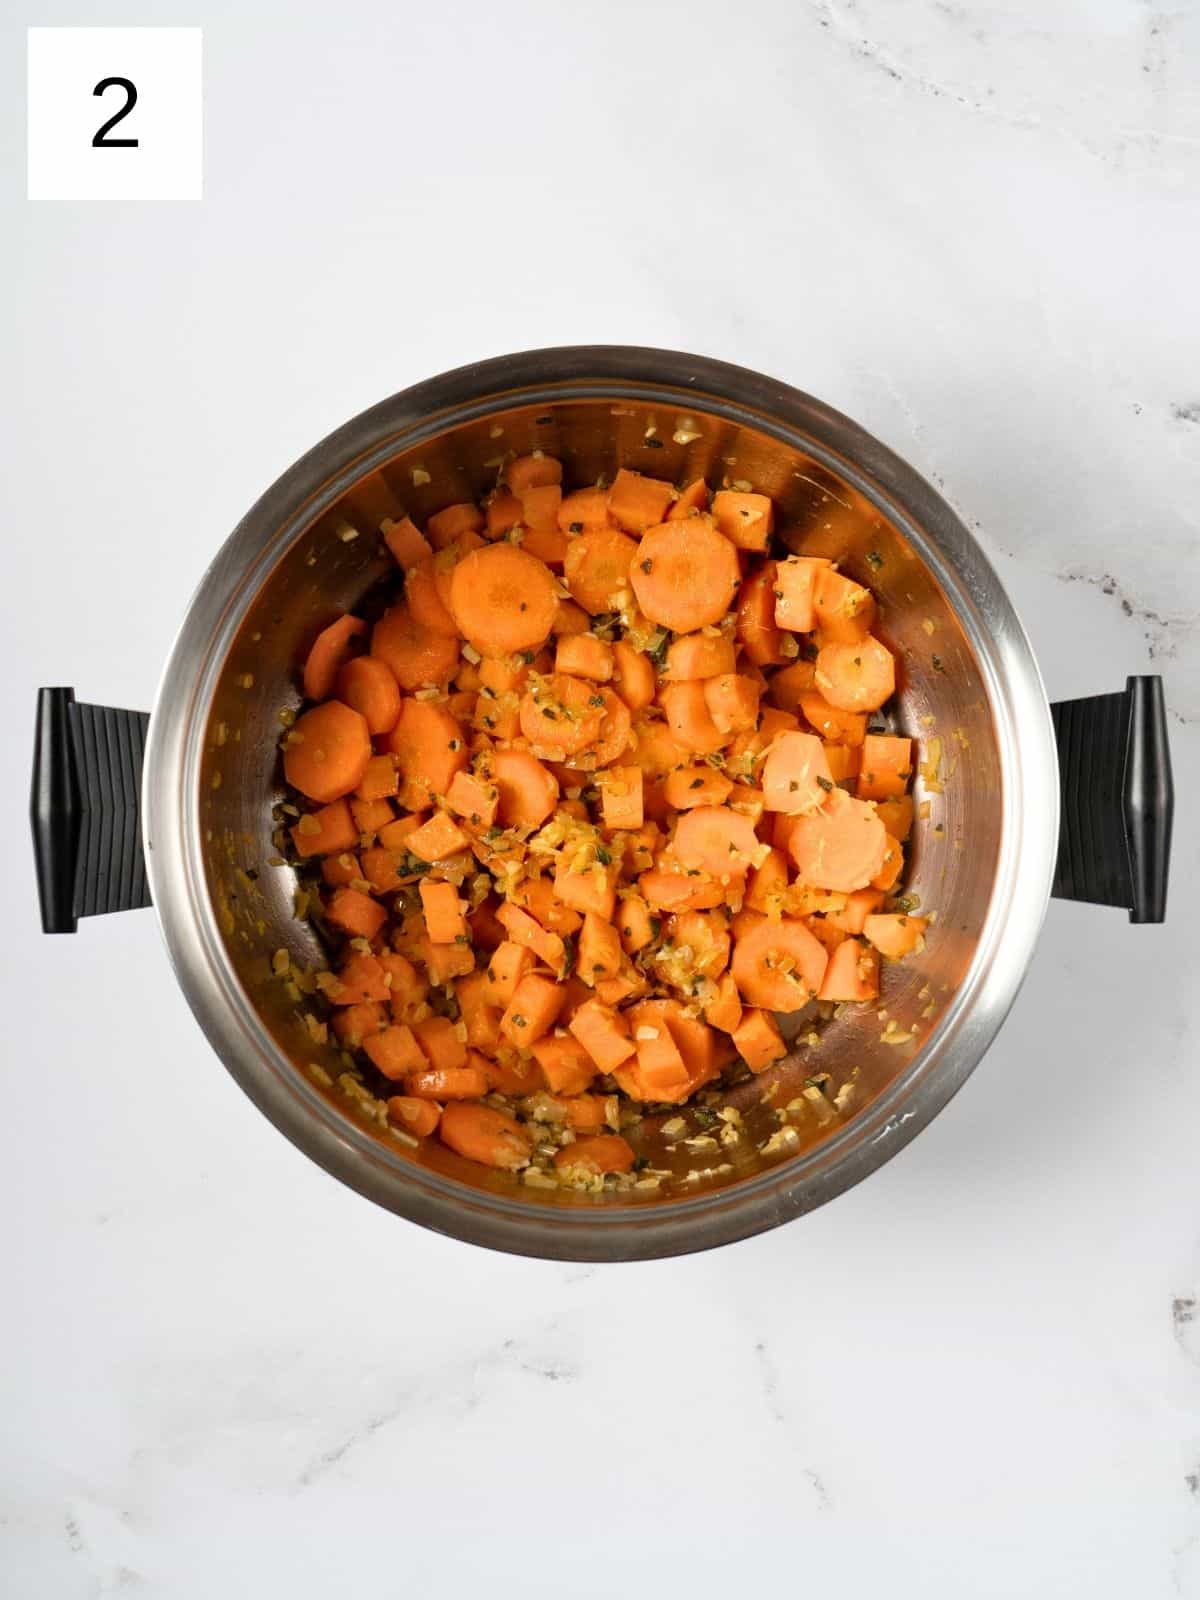 cubes sweet potatoes and sliced carrots, coated with sautéed herbs and spices, in a pot.